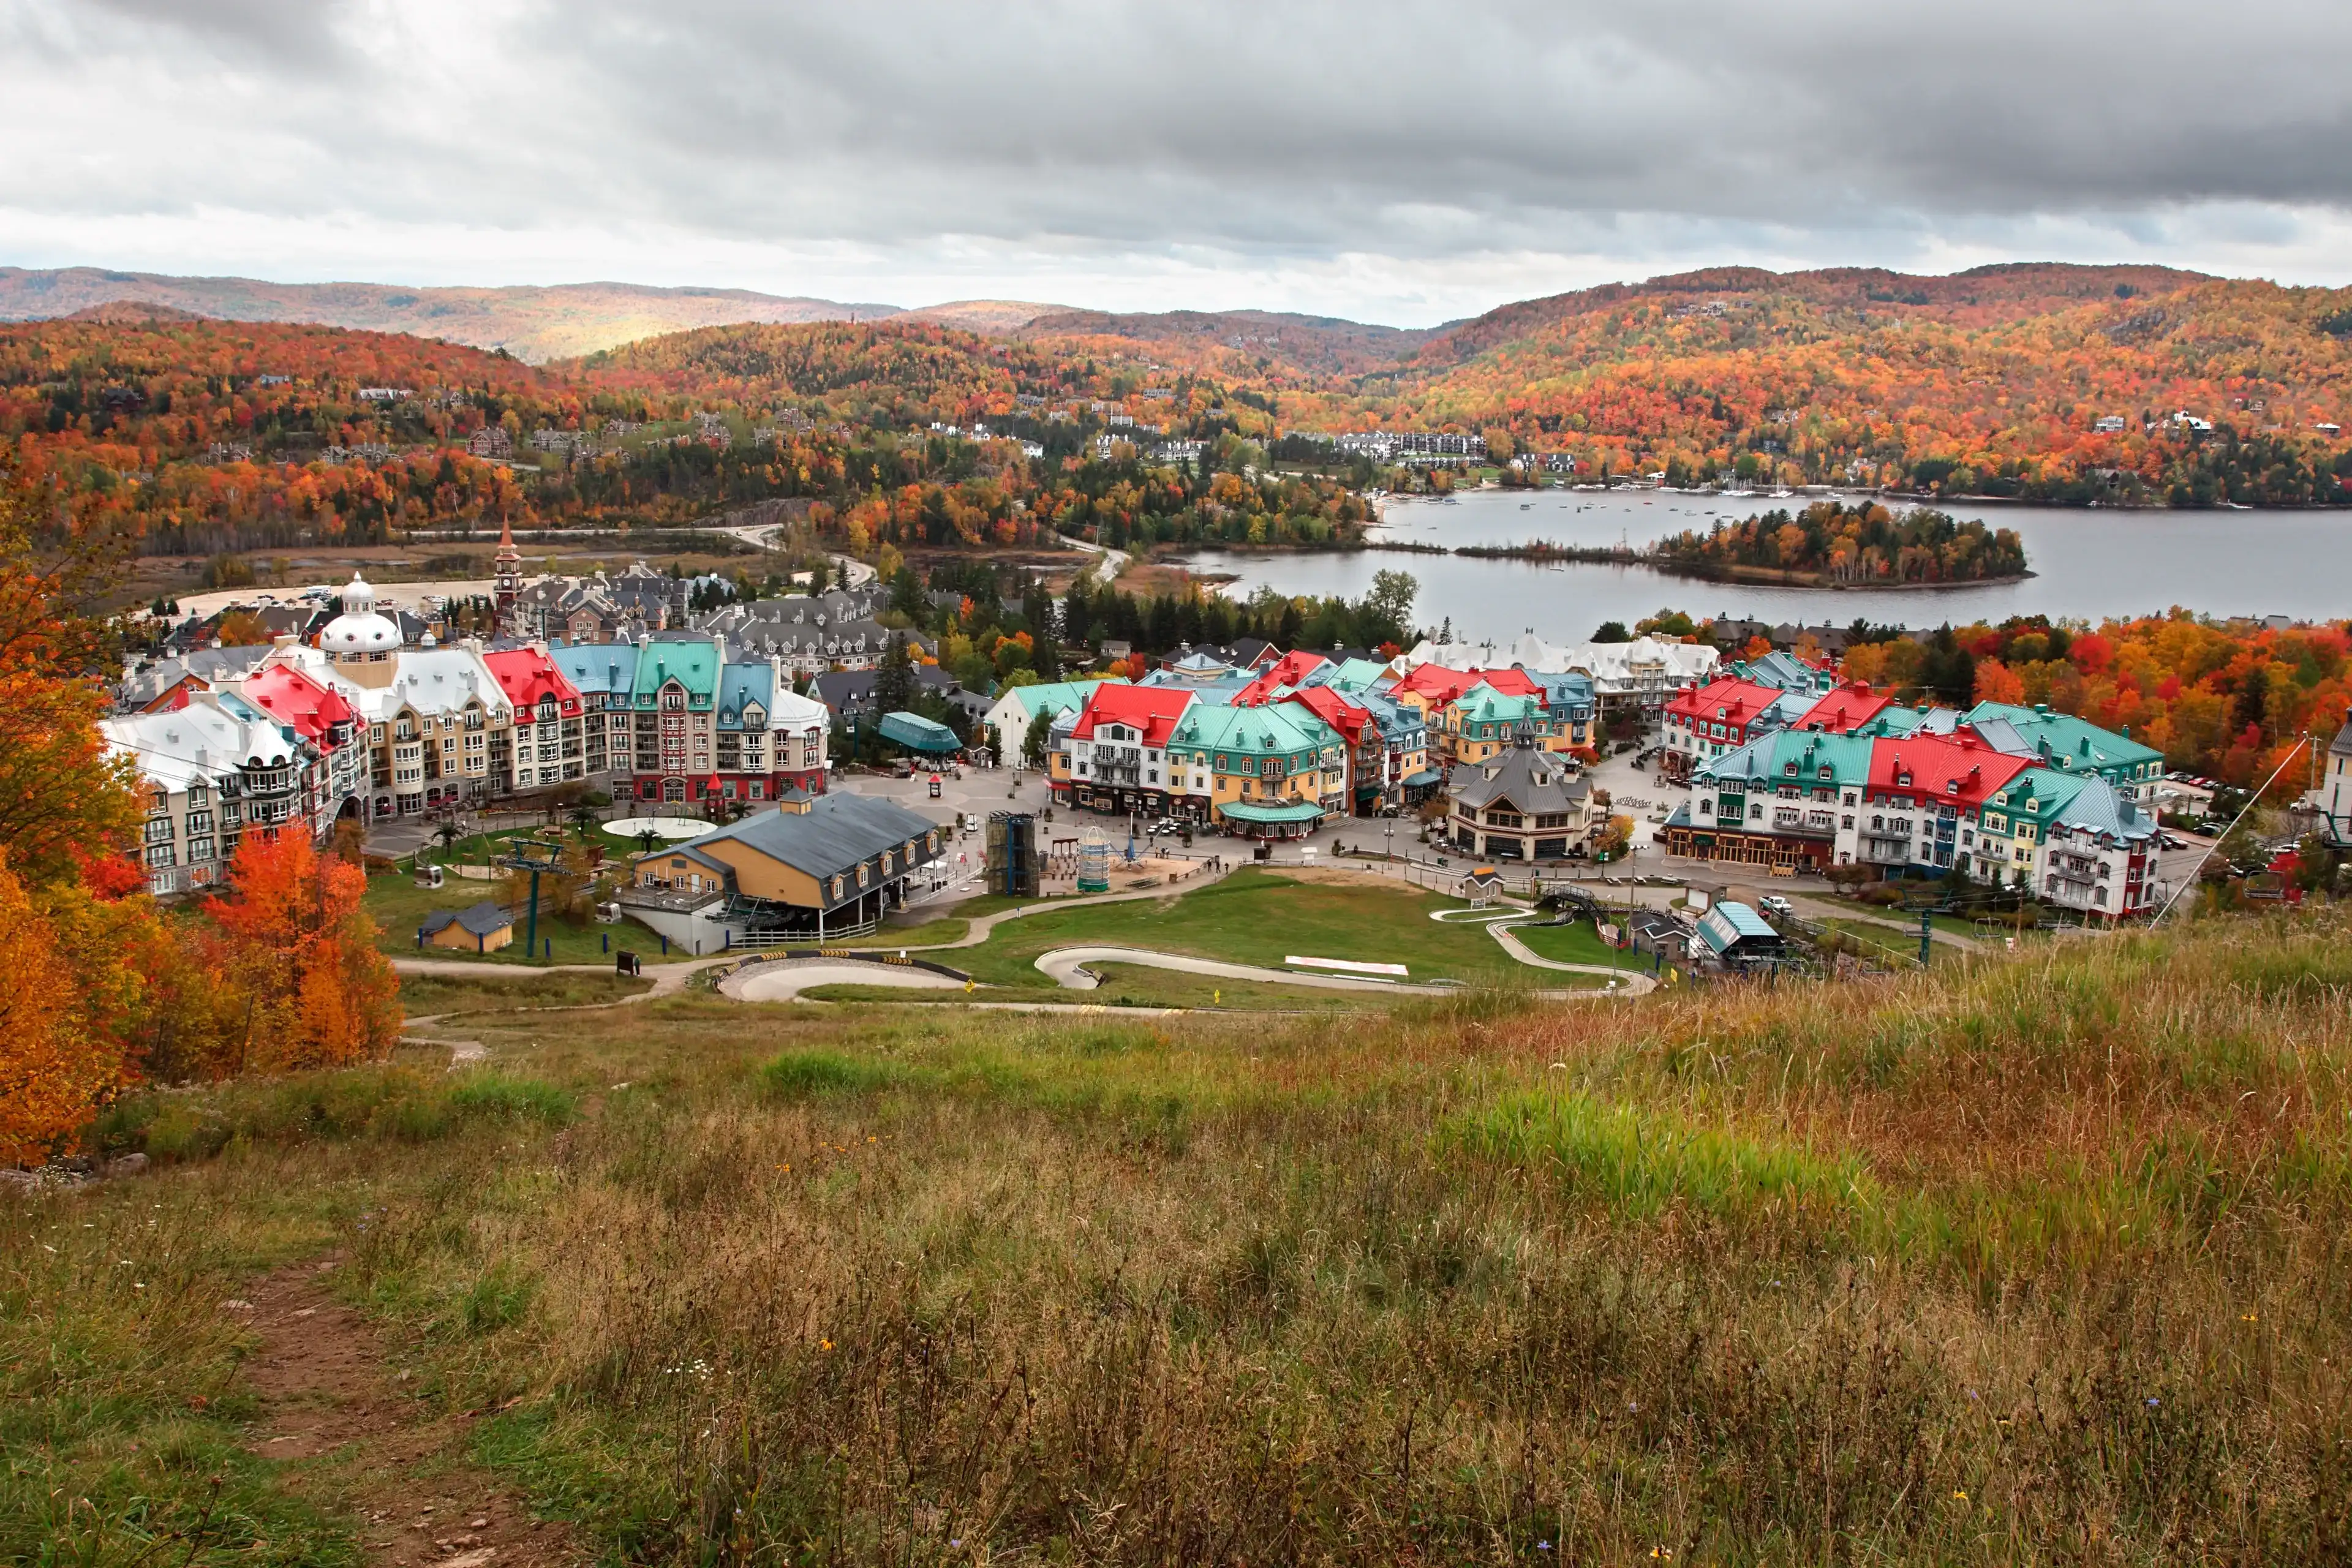 Best Mont-Tremblant hotels. Cheap hotels in Mont-Tremblant, Québec, Canada